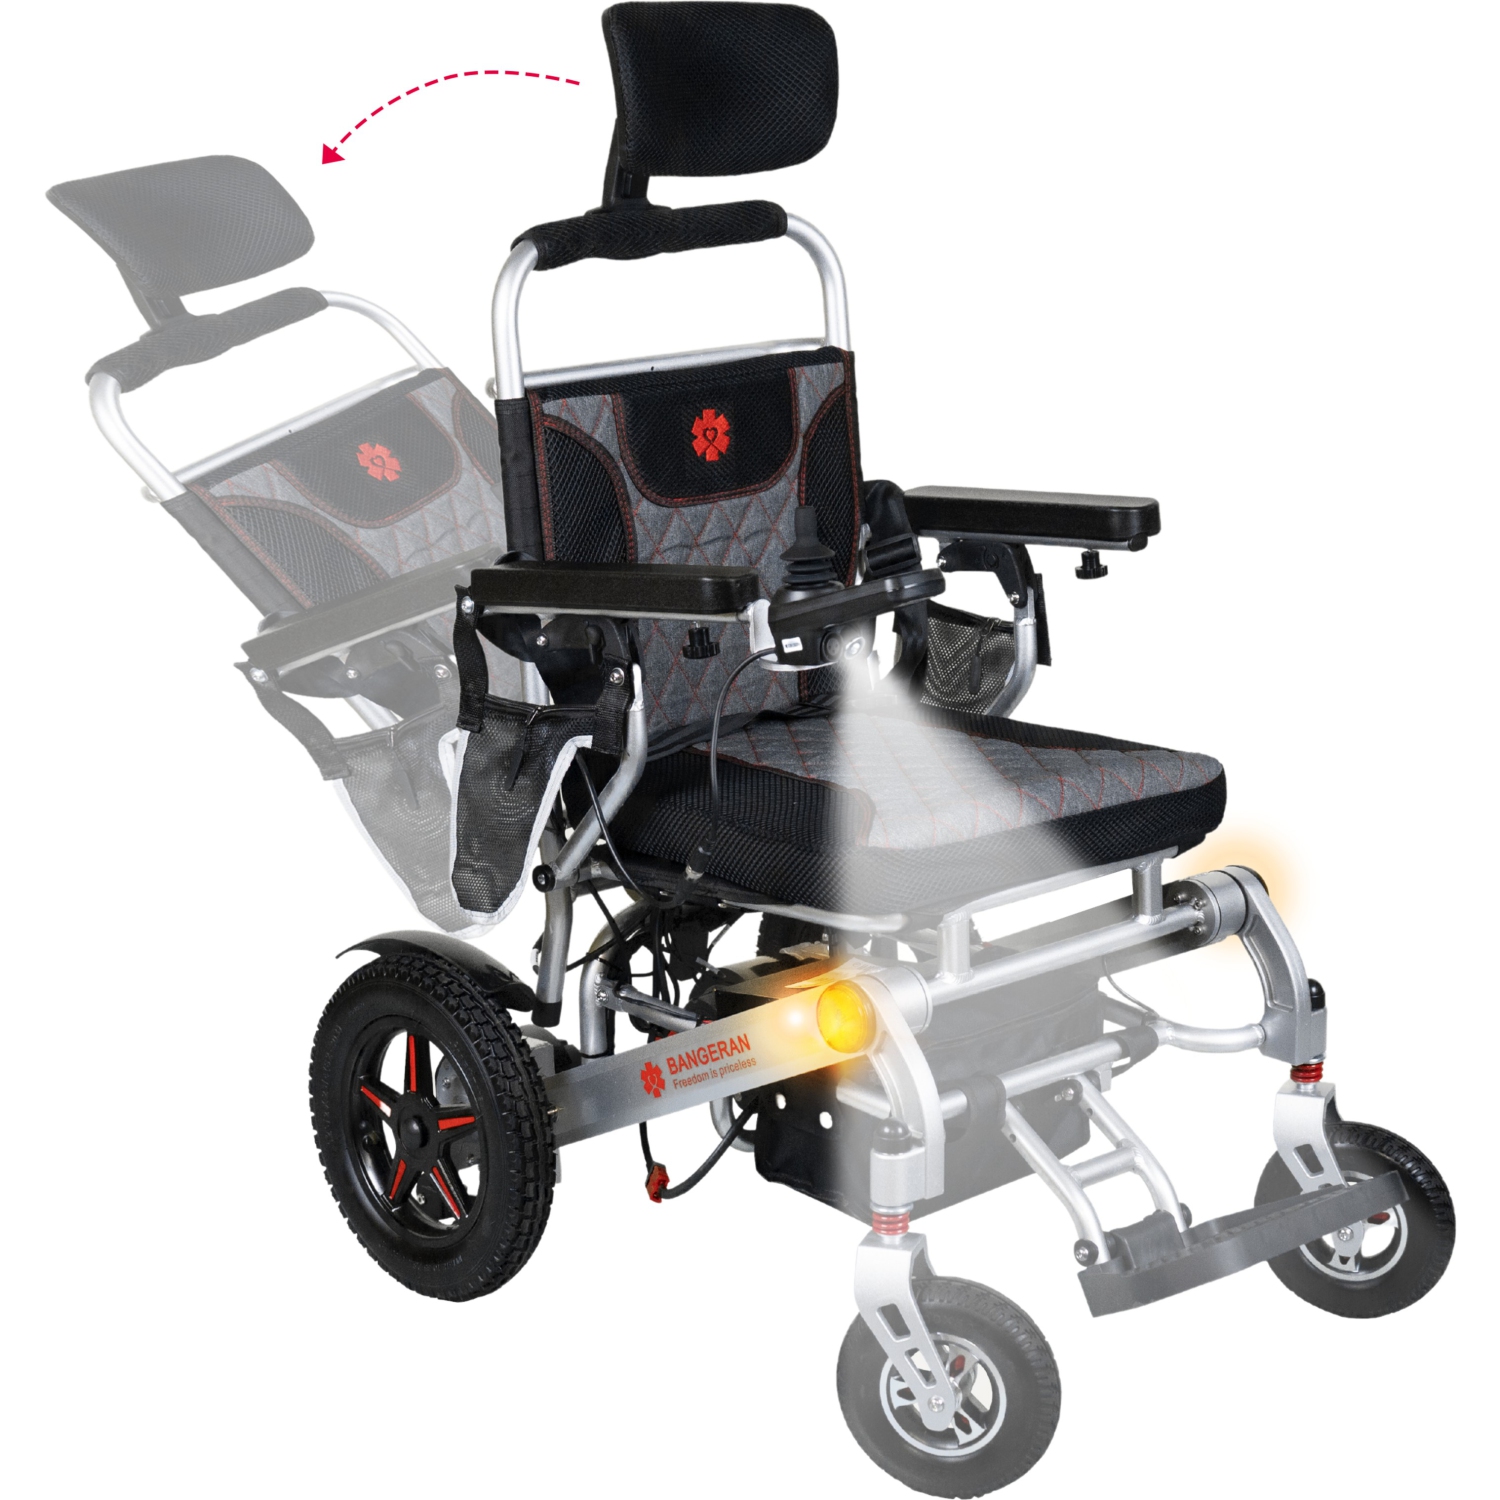 Thunderbolt Automatic Reclining Power Motorized Medical Wheelchair, Portable & Foldable | Adjustable Backrest & Wide Seat | Turn Signals | Folding Leg | Silver